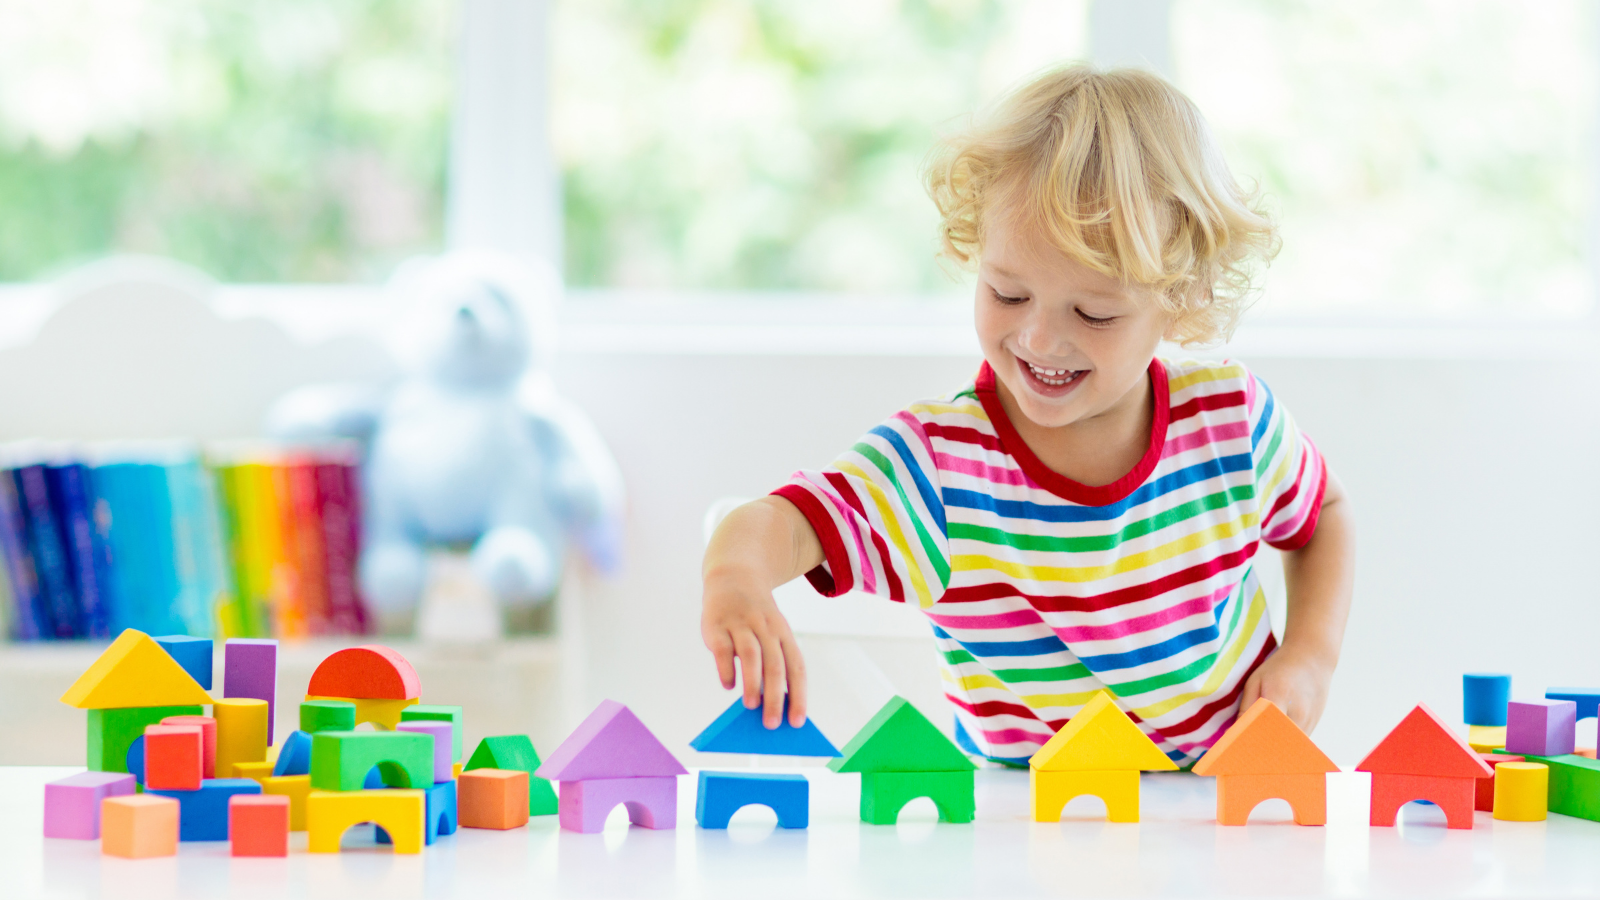 Day 3: How to choose the right toys for your kids to encourage play and creativity